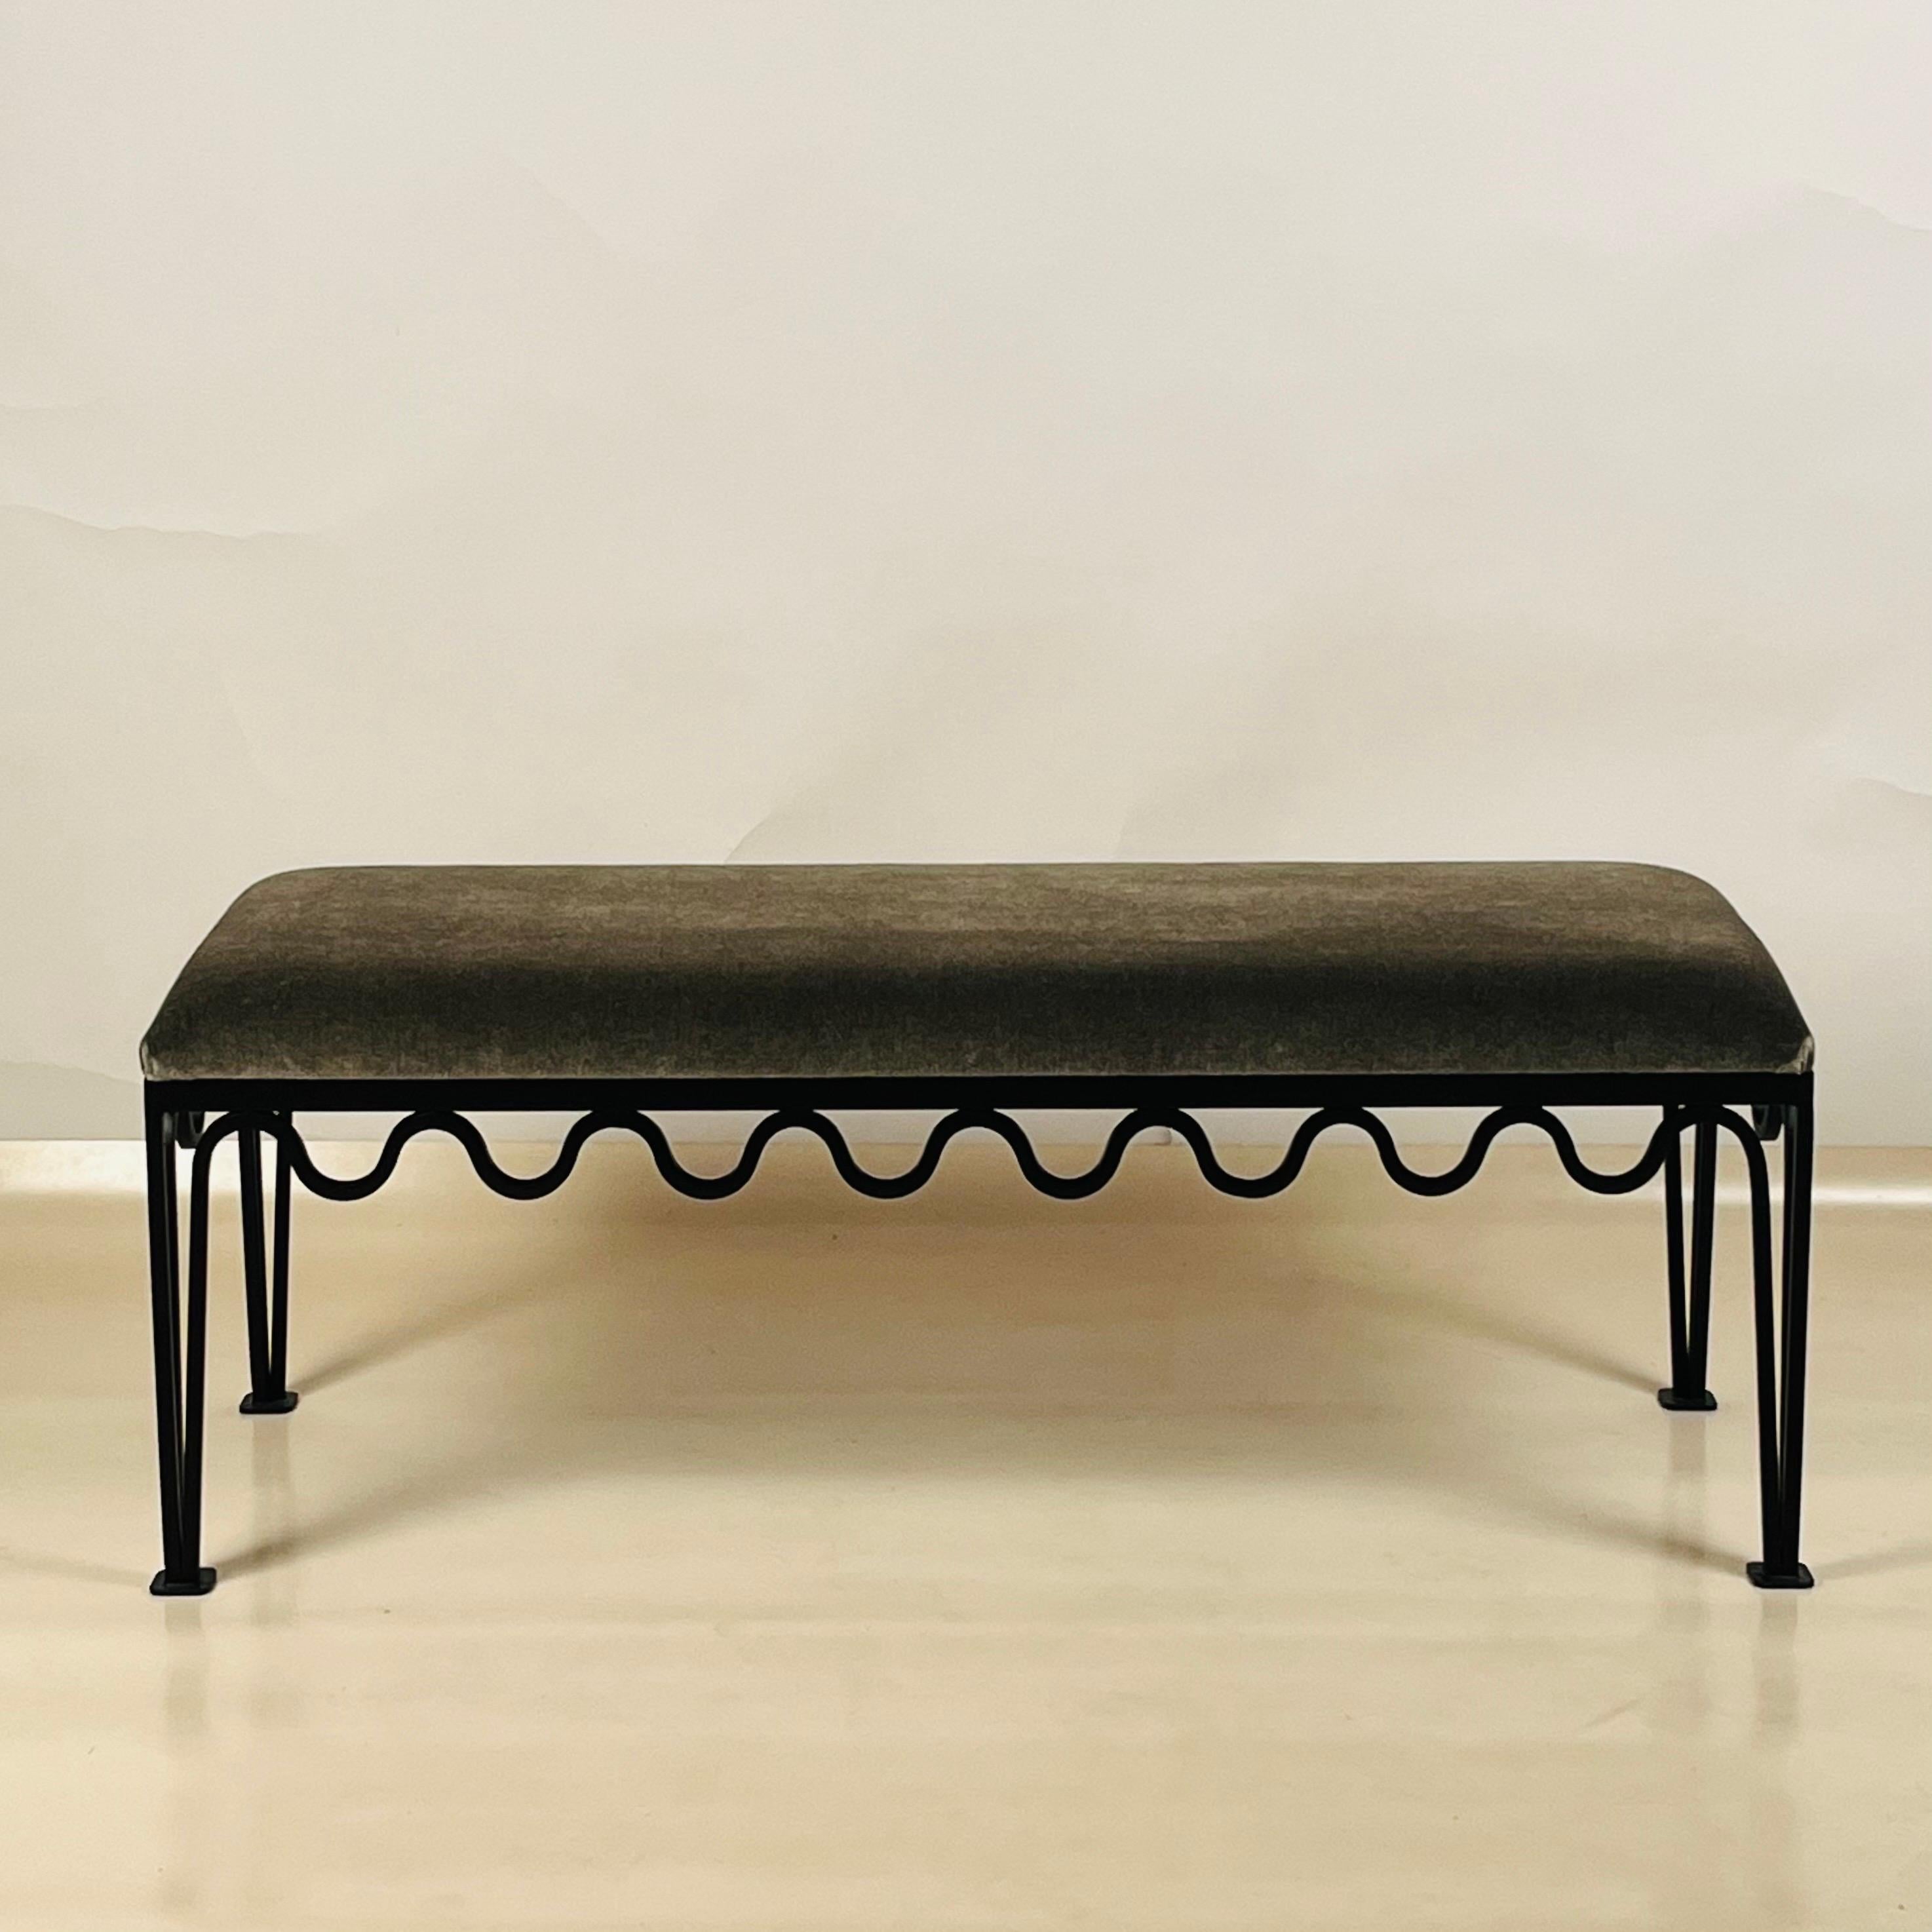 'Méandre' Bench by Design Frères in Mohair Velvet or COM In New Condition For Sale In Los Angeles, CA